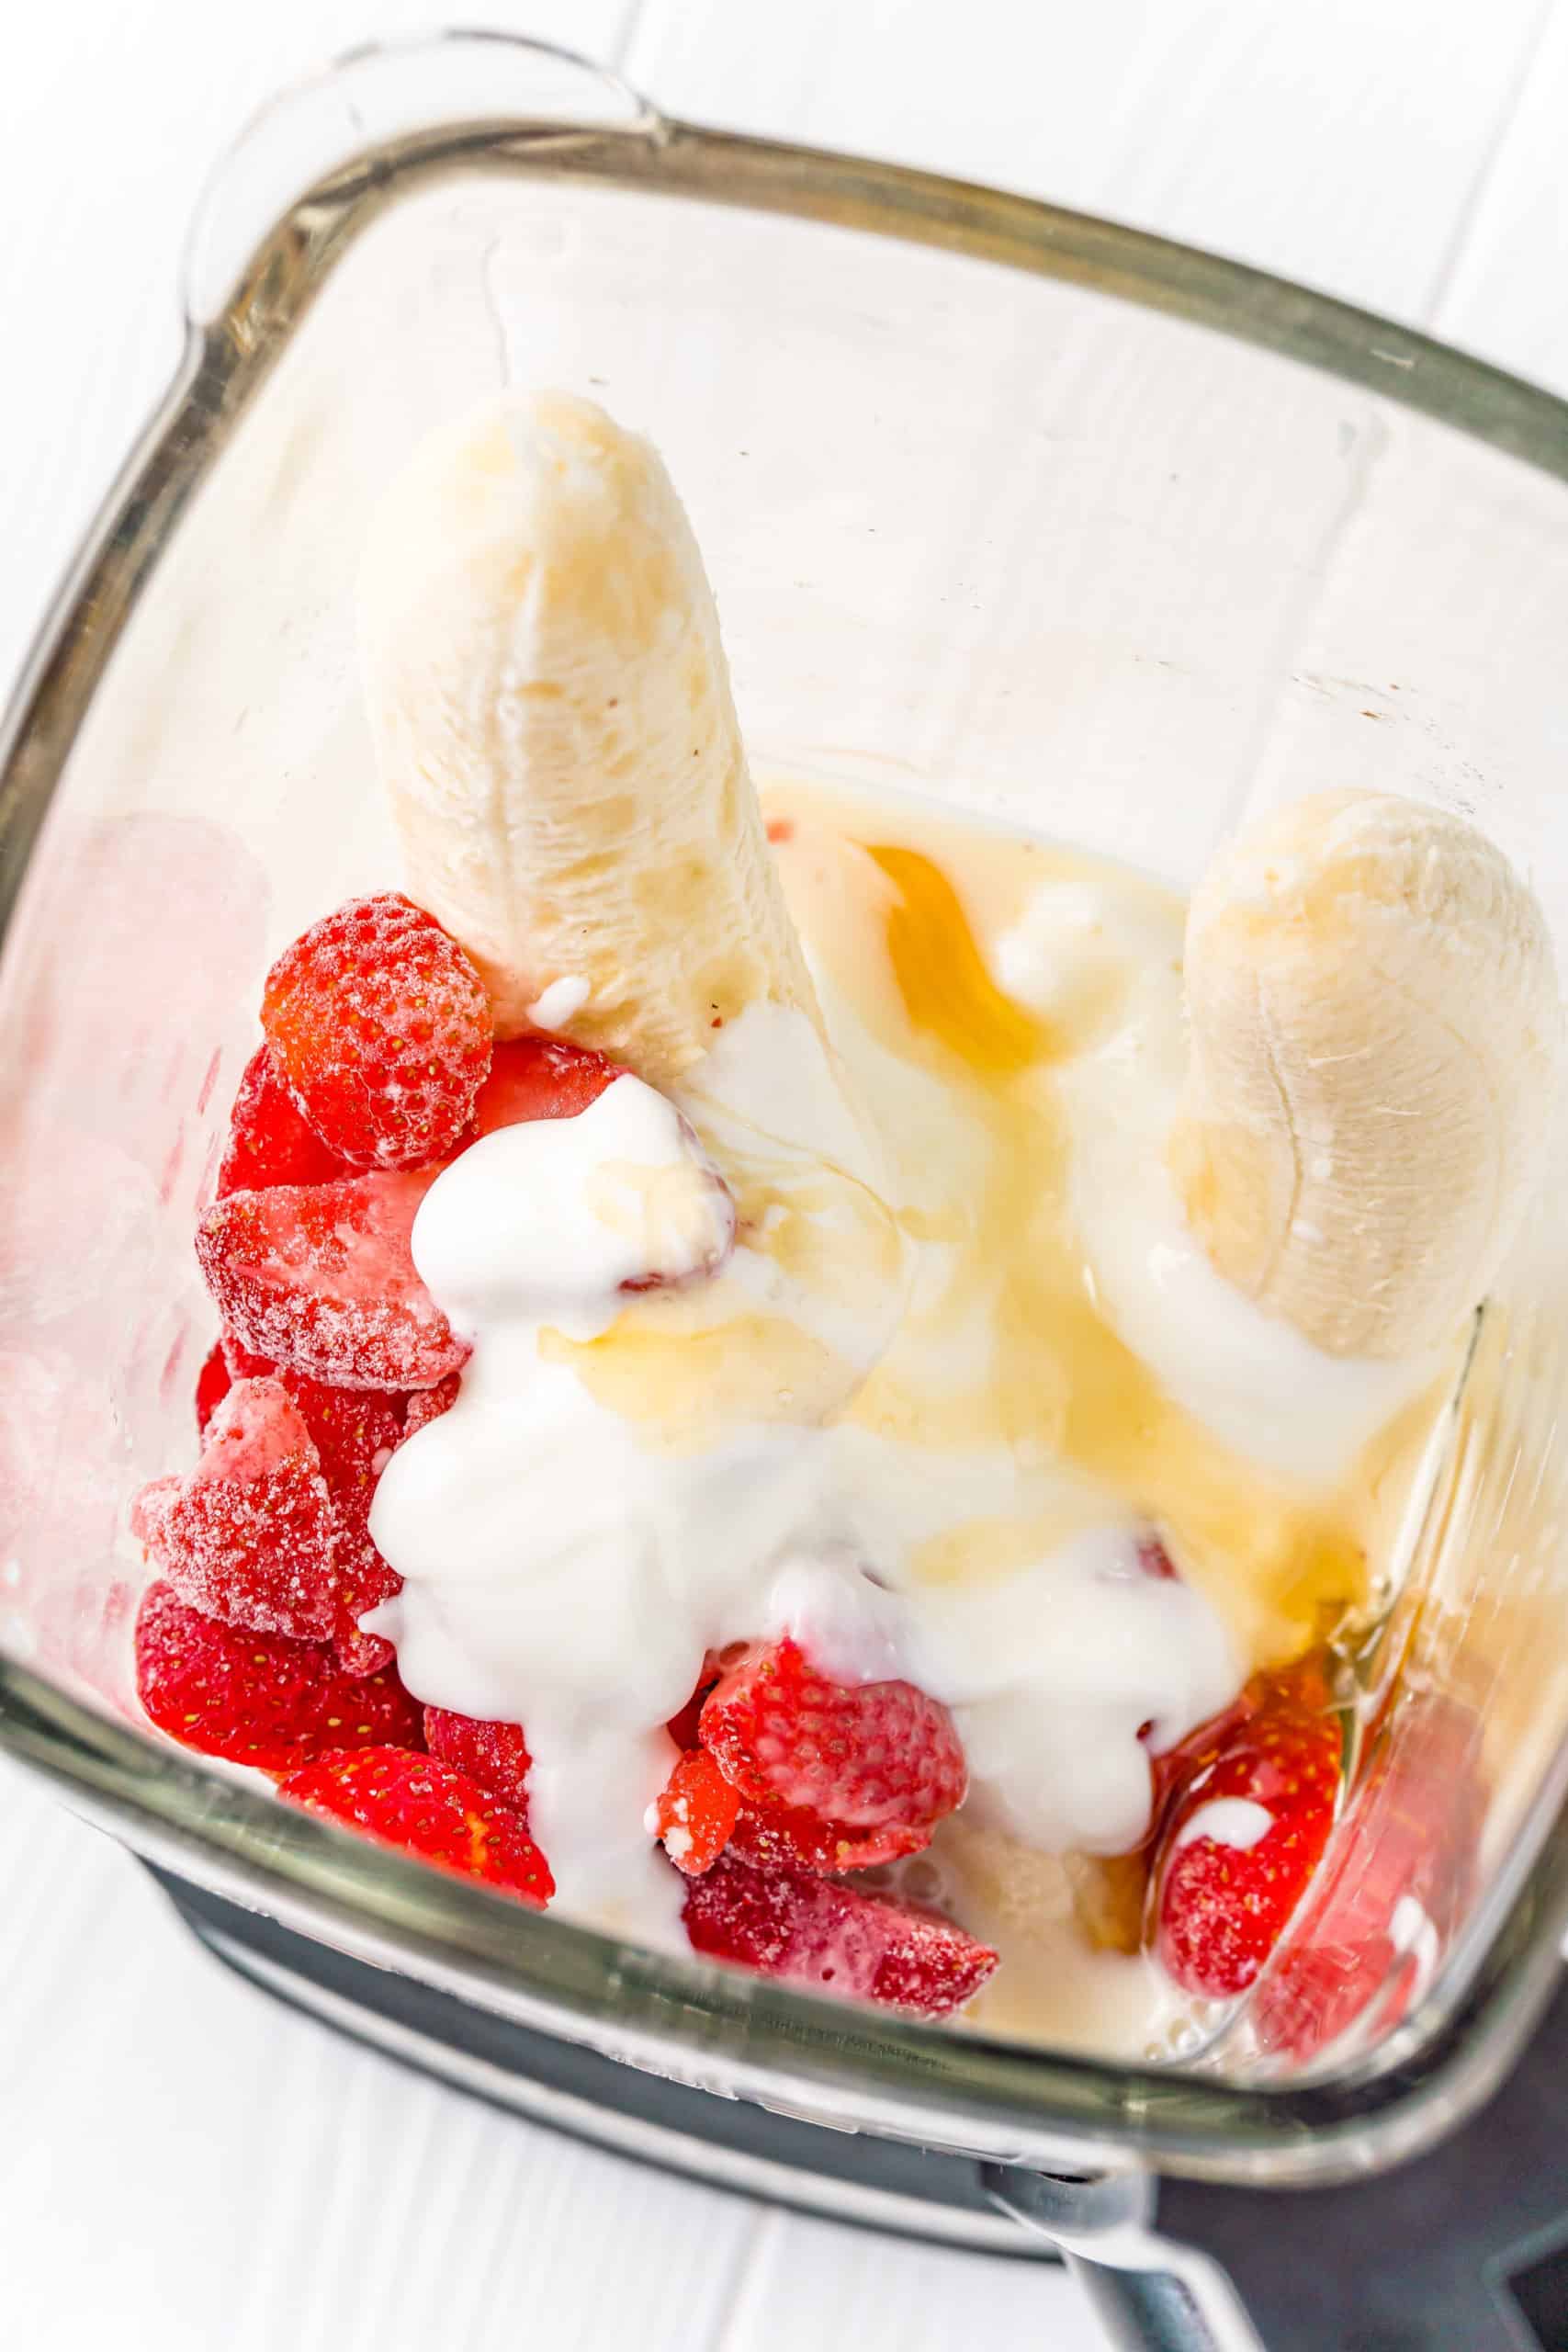 strawberry banana smoothie ingredients added to a blender.